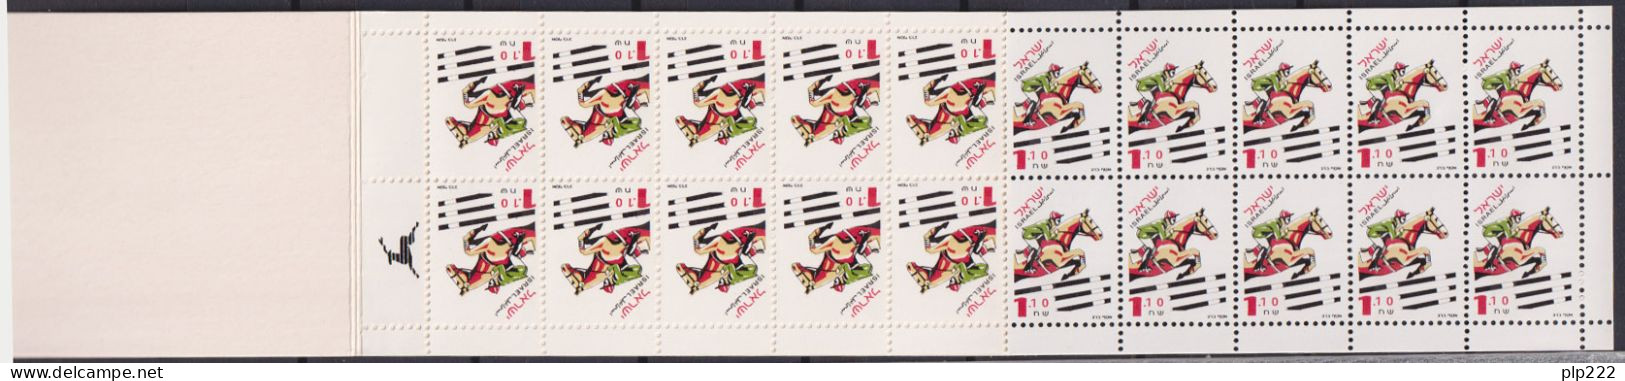 Israele 1997 Y.T.C1349 **/MNH VF - Booklets